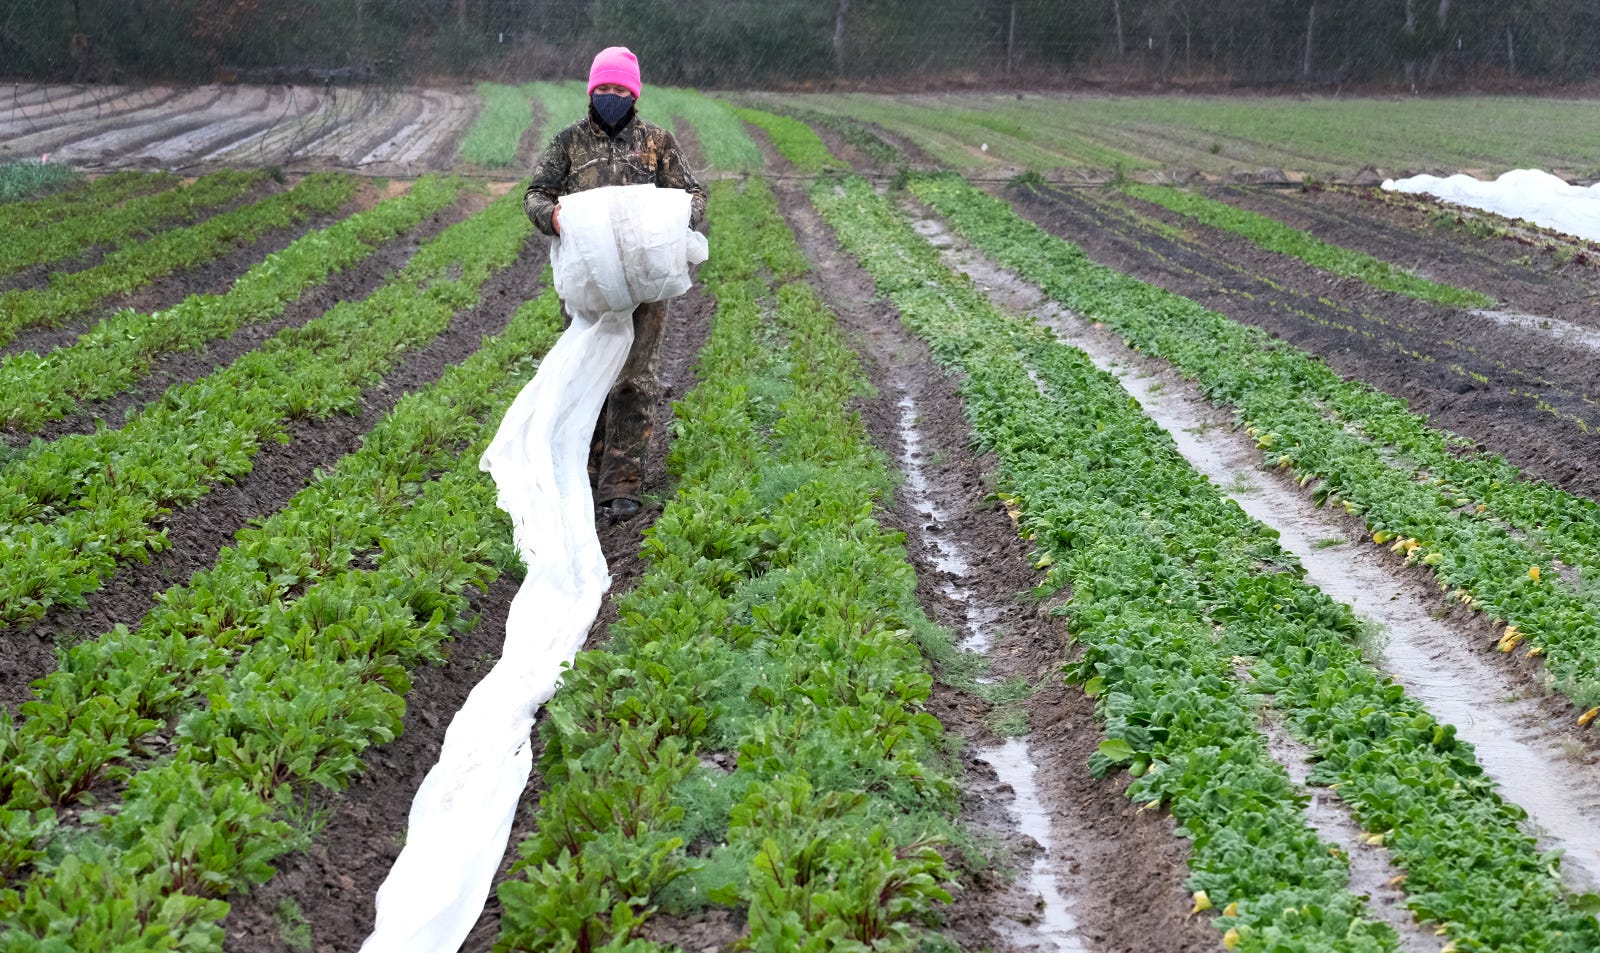 Becky Hume spreads row cover between rows of vegetables on Thursday at VRDNT Farm in Bastrop to protect produce through the freezing temperatures forecast for the weekend.